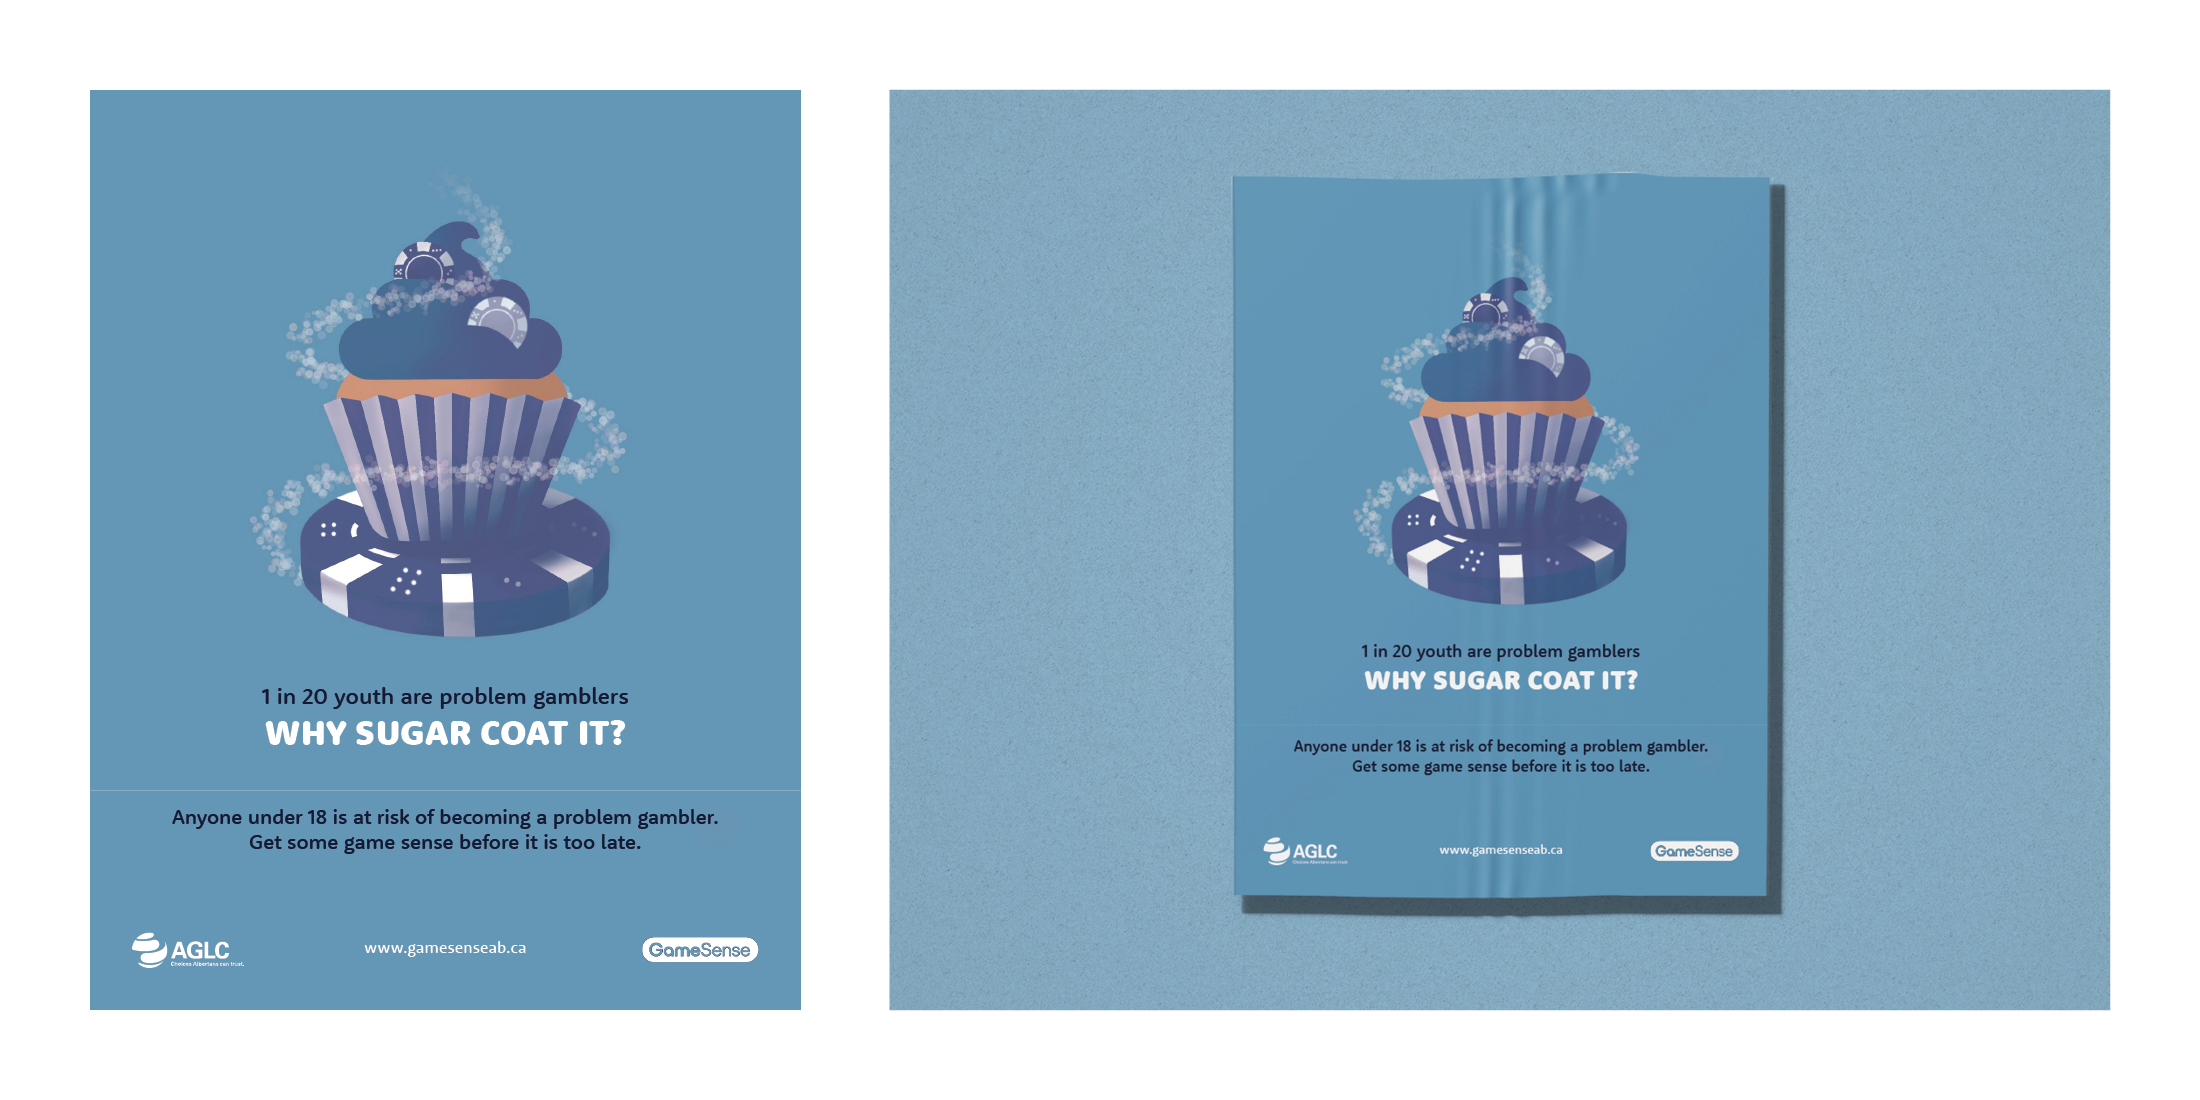 Why Sugar Coat It? Advertising Campaign - Image 1